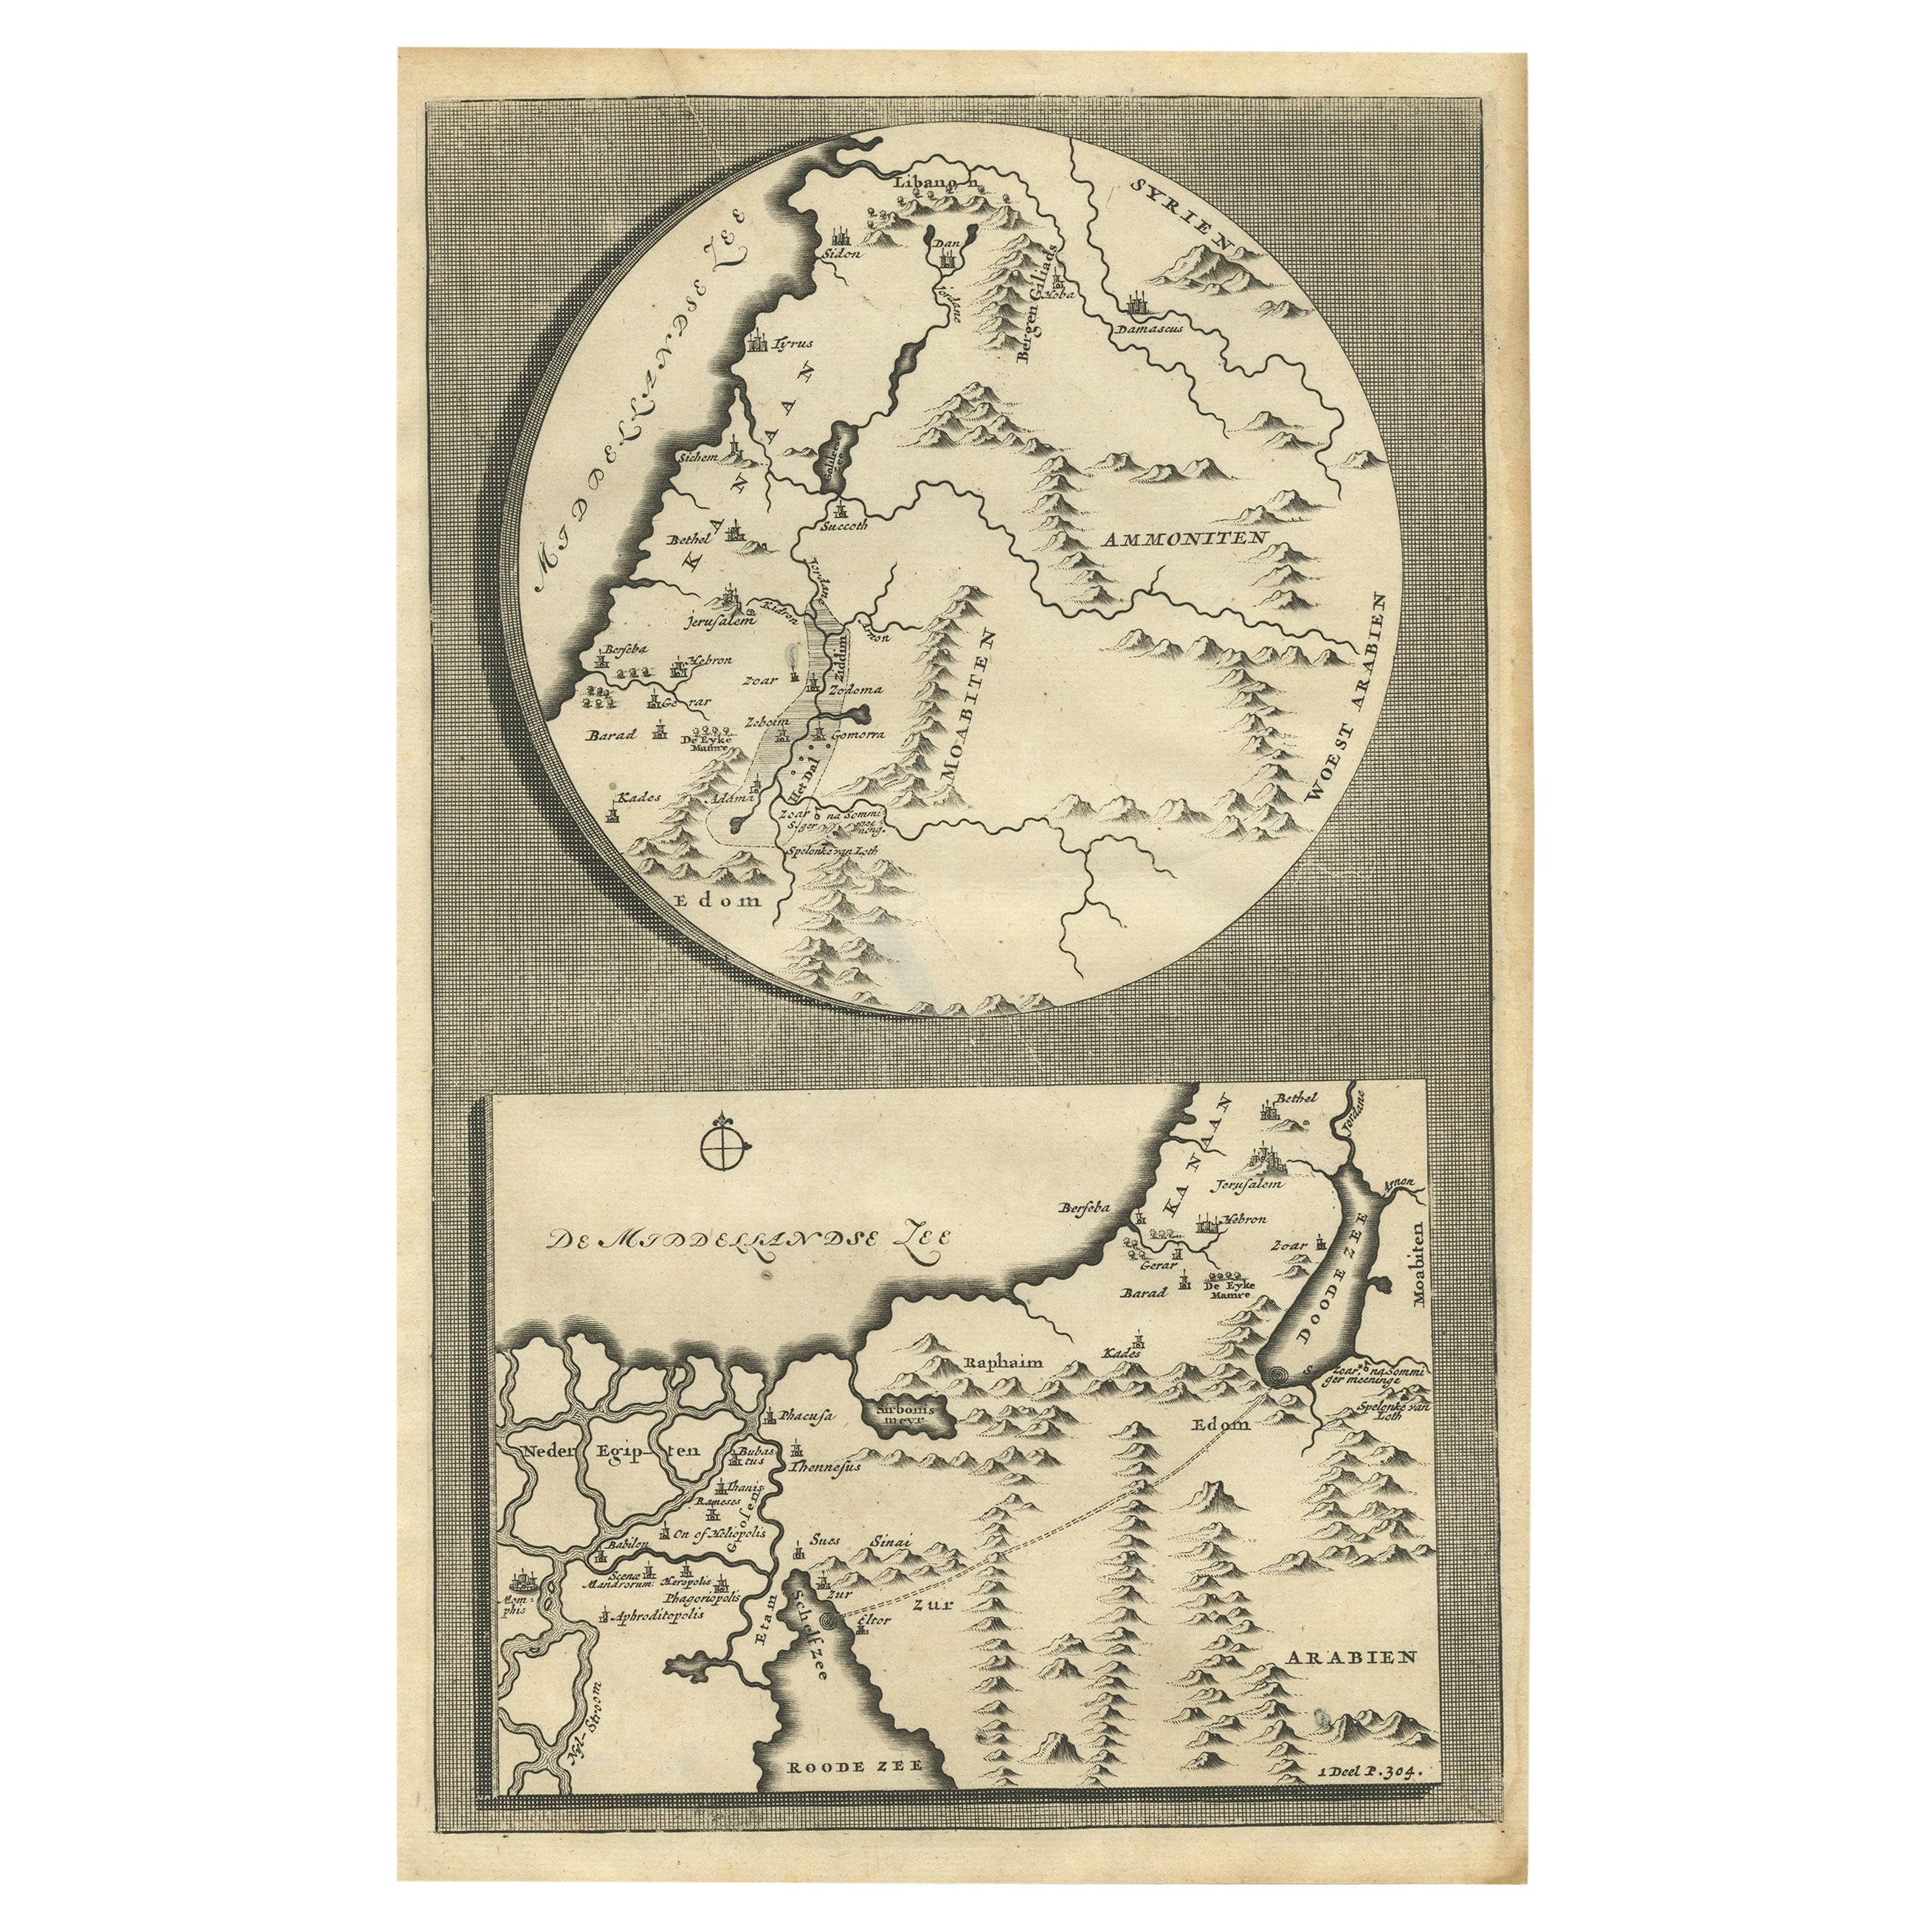 Rare Antique Map of the Middle East, ca.1690